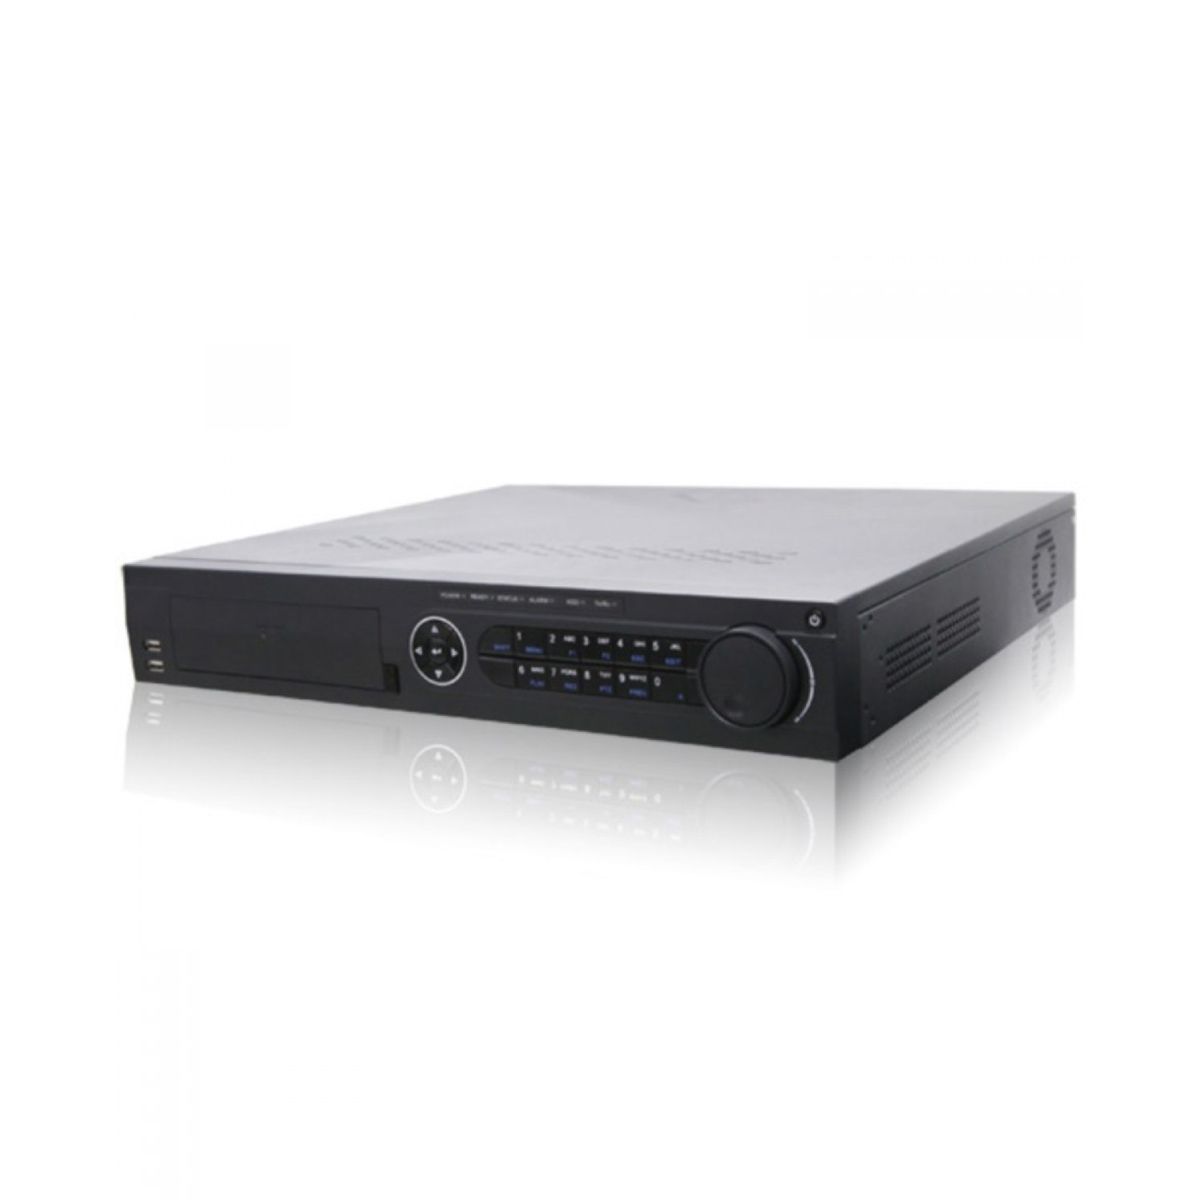 NVR Hikvision 32 canales DS-7732NI-E4